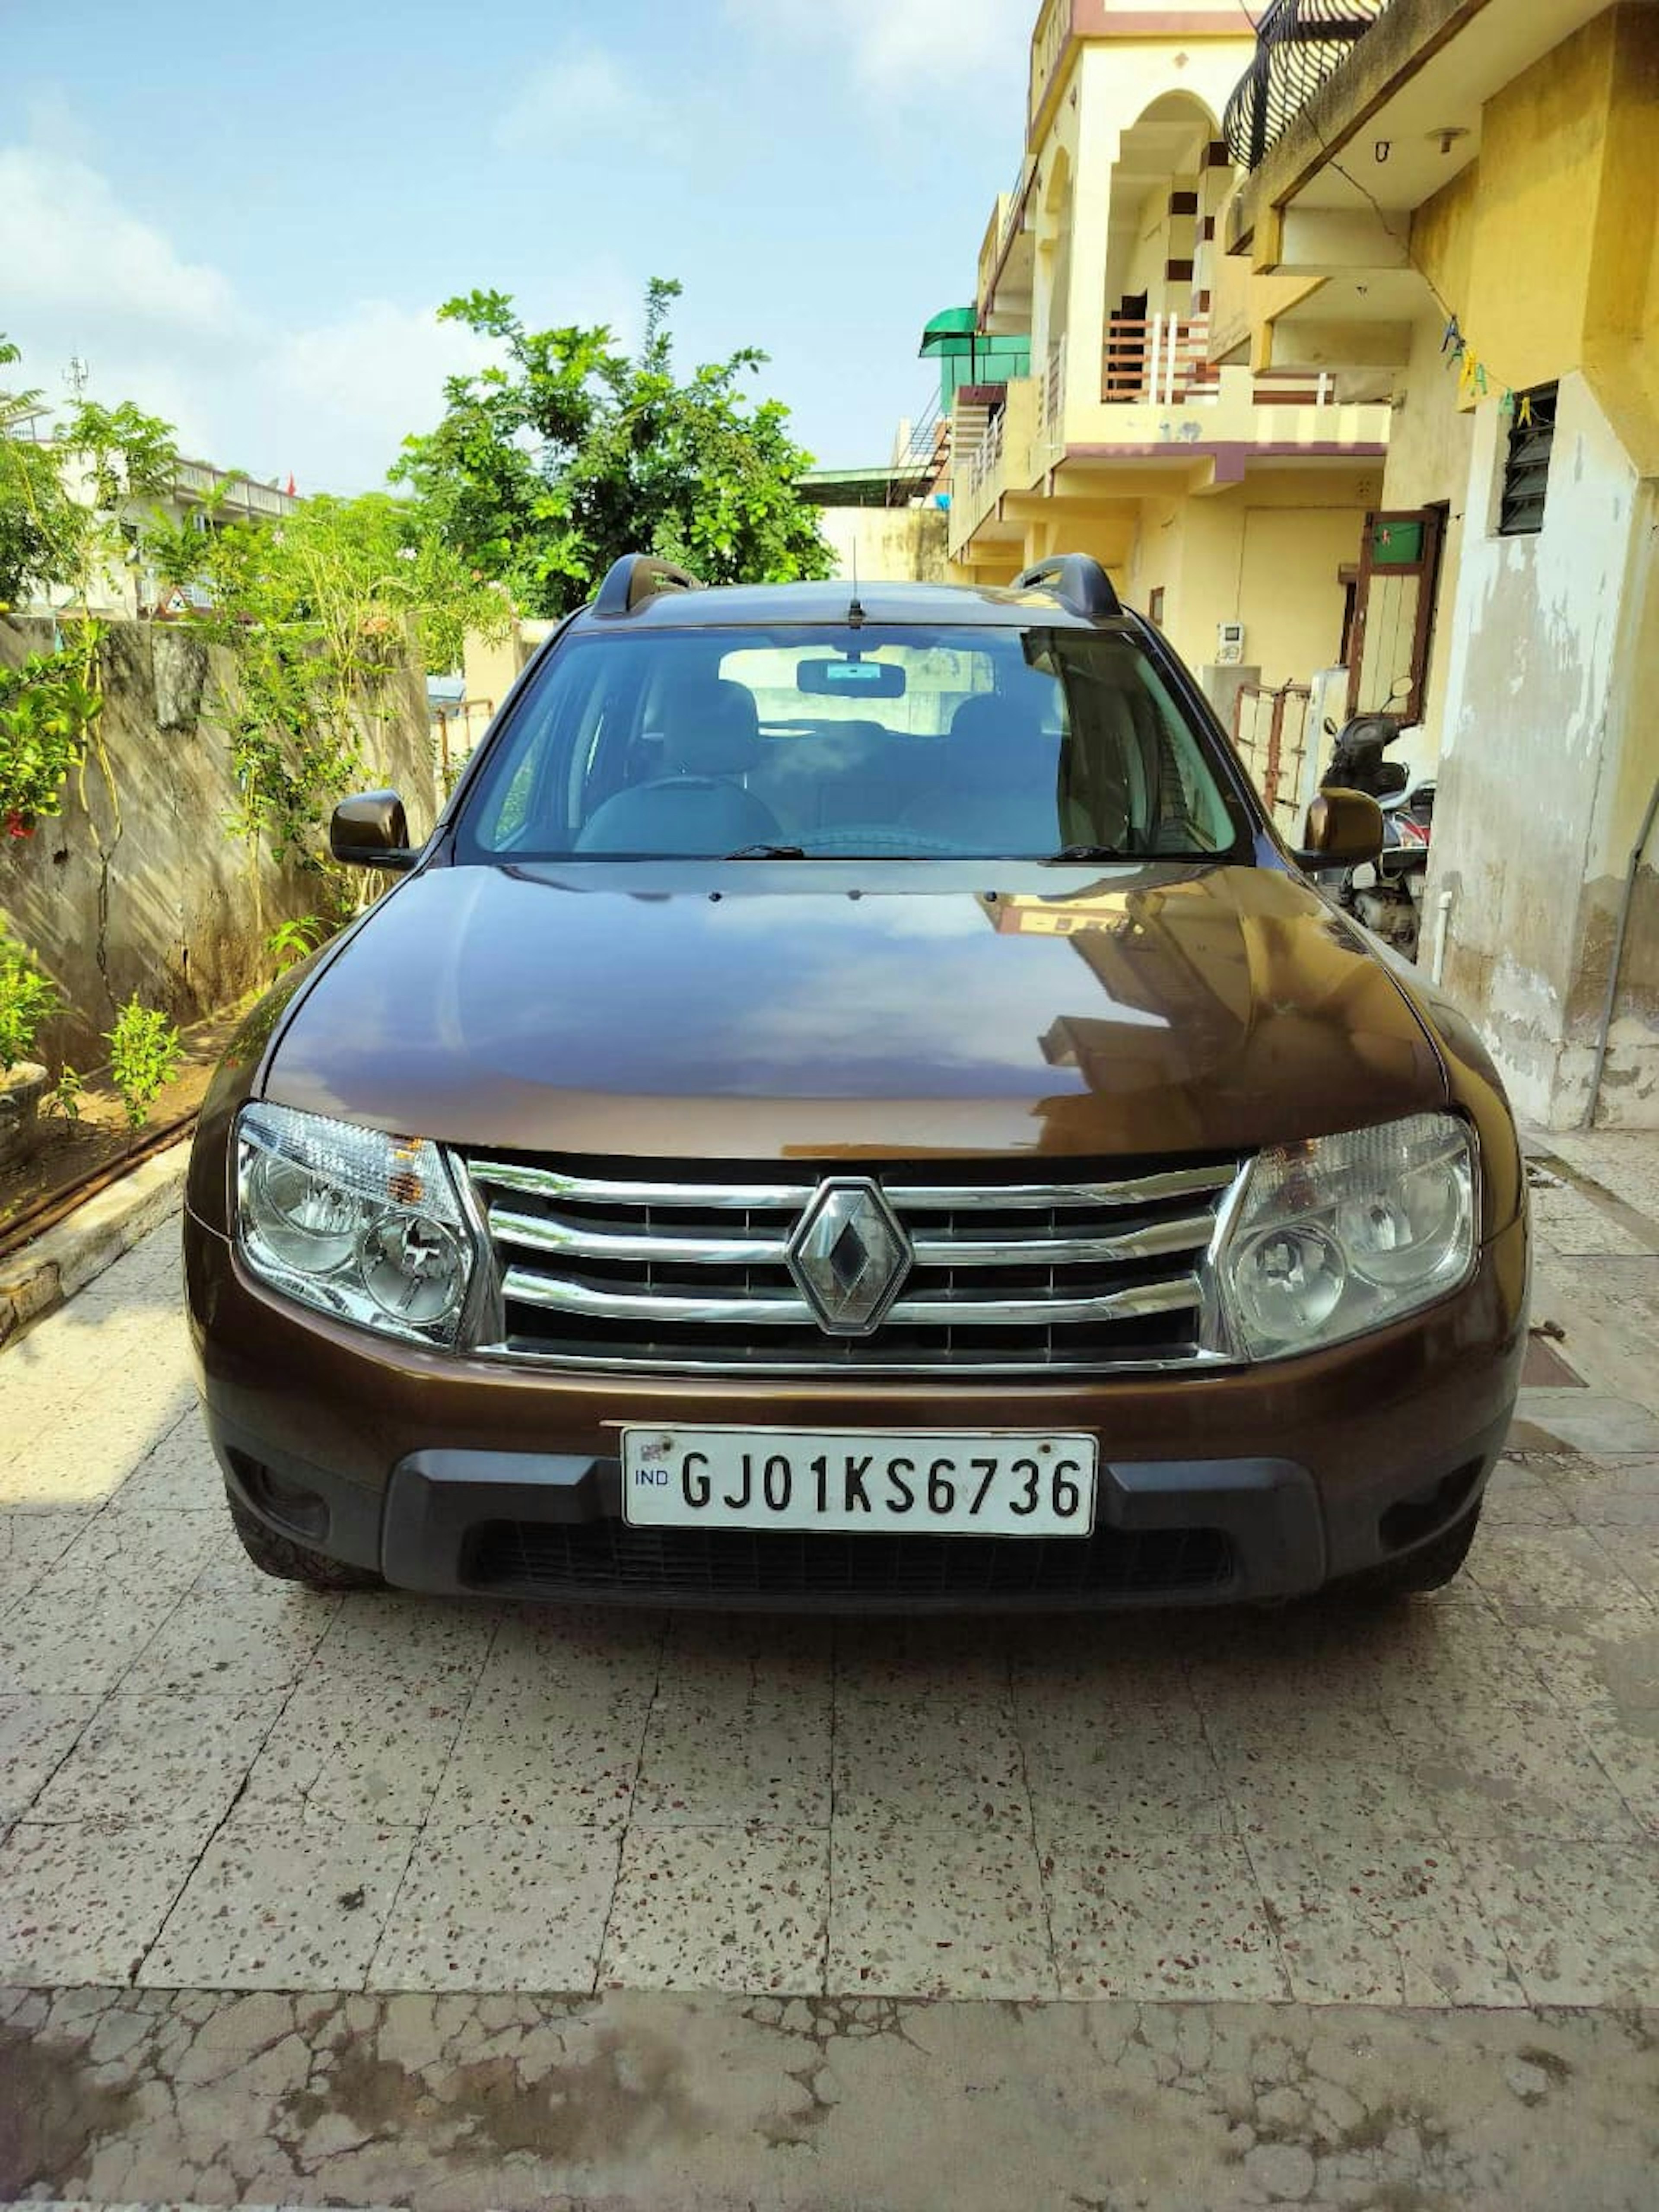 View - Renault Duster photos, Renault Duster available in Ahmedabad, make deal in 370000